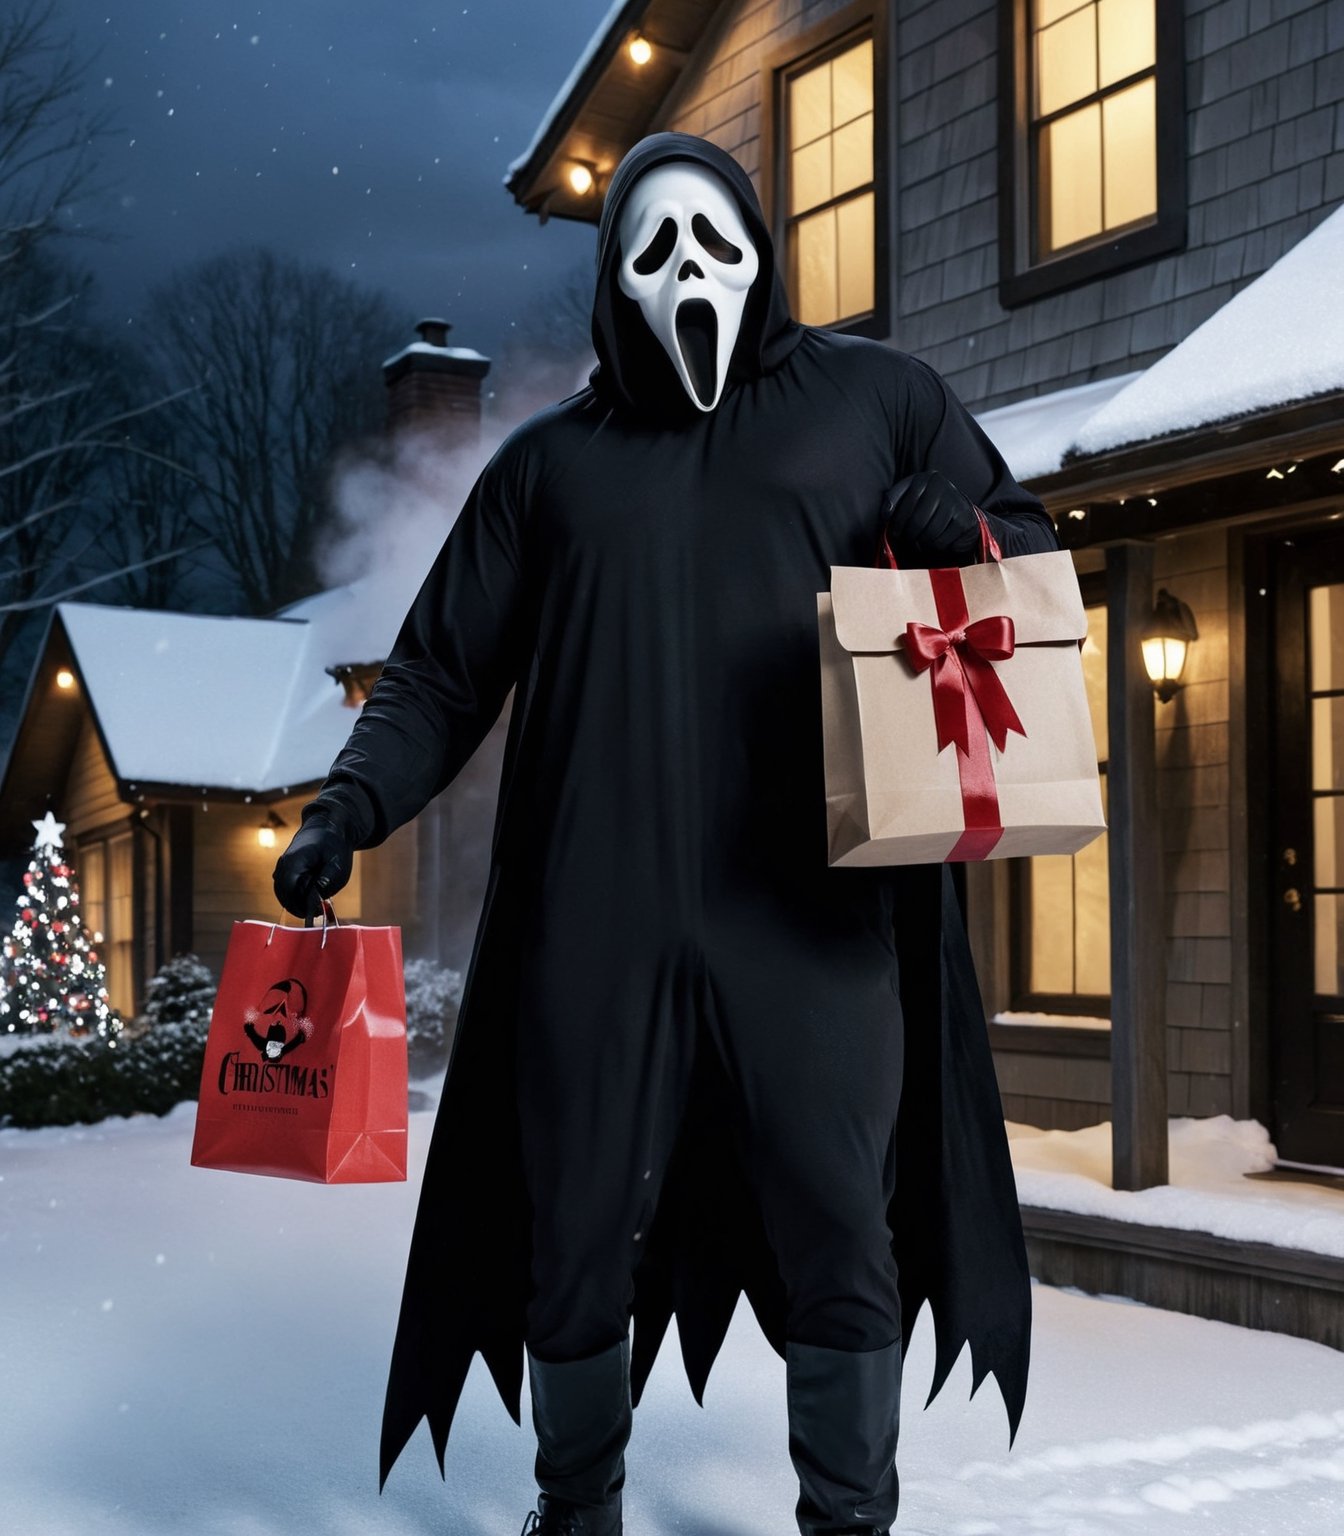 Masterpiece in high resolution, horror and Christmas style, creating a dynamic and engaging scene. | At midnight on Christmas Eve, Ghostface, the iconic horror character, is on Santa's sleigh, flying over an illuminated house. Wearing his classic scary mask, he holds a bag of macabre gifts. The scene is composed of snow-covered roofs, smoking chimneys, and illuminated windows. The atmosphere blends terror with the Christmas spirit. | Ghostface, on Santa's sleigh, hovers over a house on Christmas night. The scary mask stands out in the scene, holding a bag of macabre gifts while flying over snow-covered roofs and smoking chimneys. The illuminated windows add a Christmas touch to the horrifying scene. | A unique fusion of horror and Christmas, with Ghostface on Santa's sleigh over a house on Christmas Eve. The scary mask, the bag of macabre gifts, and the Christmas atmosphere intertwine to create an intriguing and dynamic scene. | {The camera is positioned very close to him, revealing his entire body as he adopts a dynamic_pose, interacting with and leaning on a structure in the scene in an exciting way} | He is adopting a ((dynamic_pose as interacts, boldly leaning on a structure, leaning back in an exciting way):1.3), ((perfect_pose)), ((full body)), perfect_fingers, perfect_legs, More Detail, perfect, ghostface mask